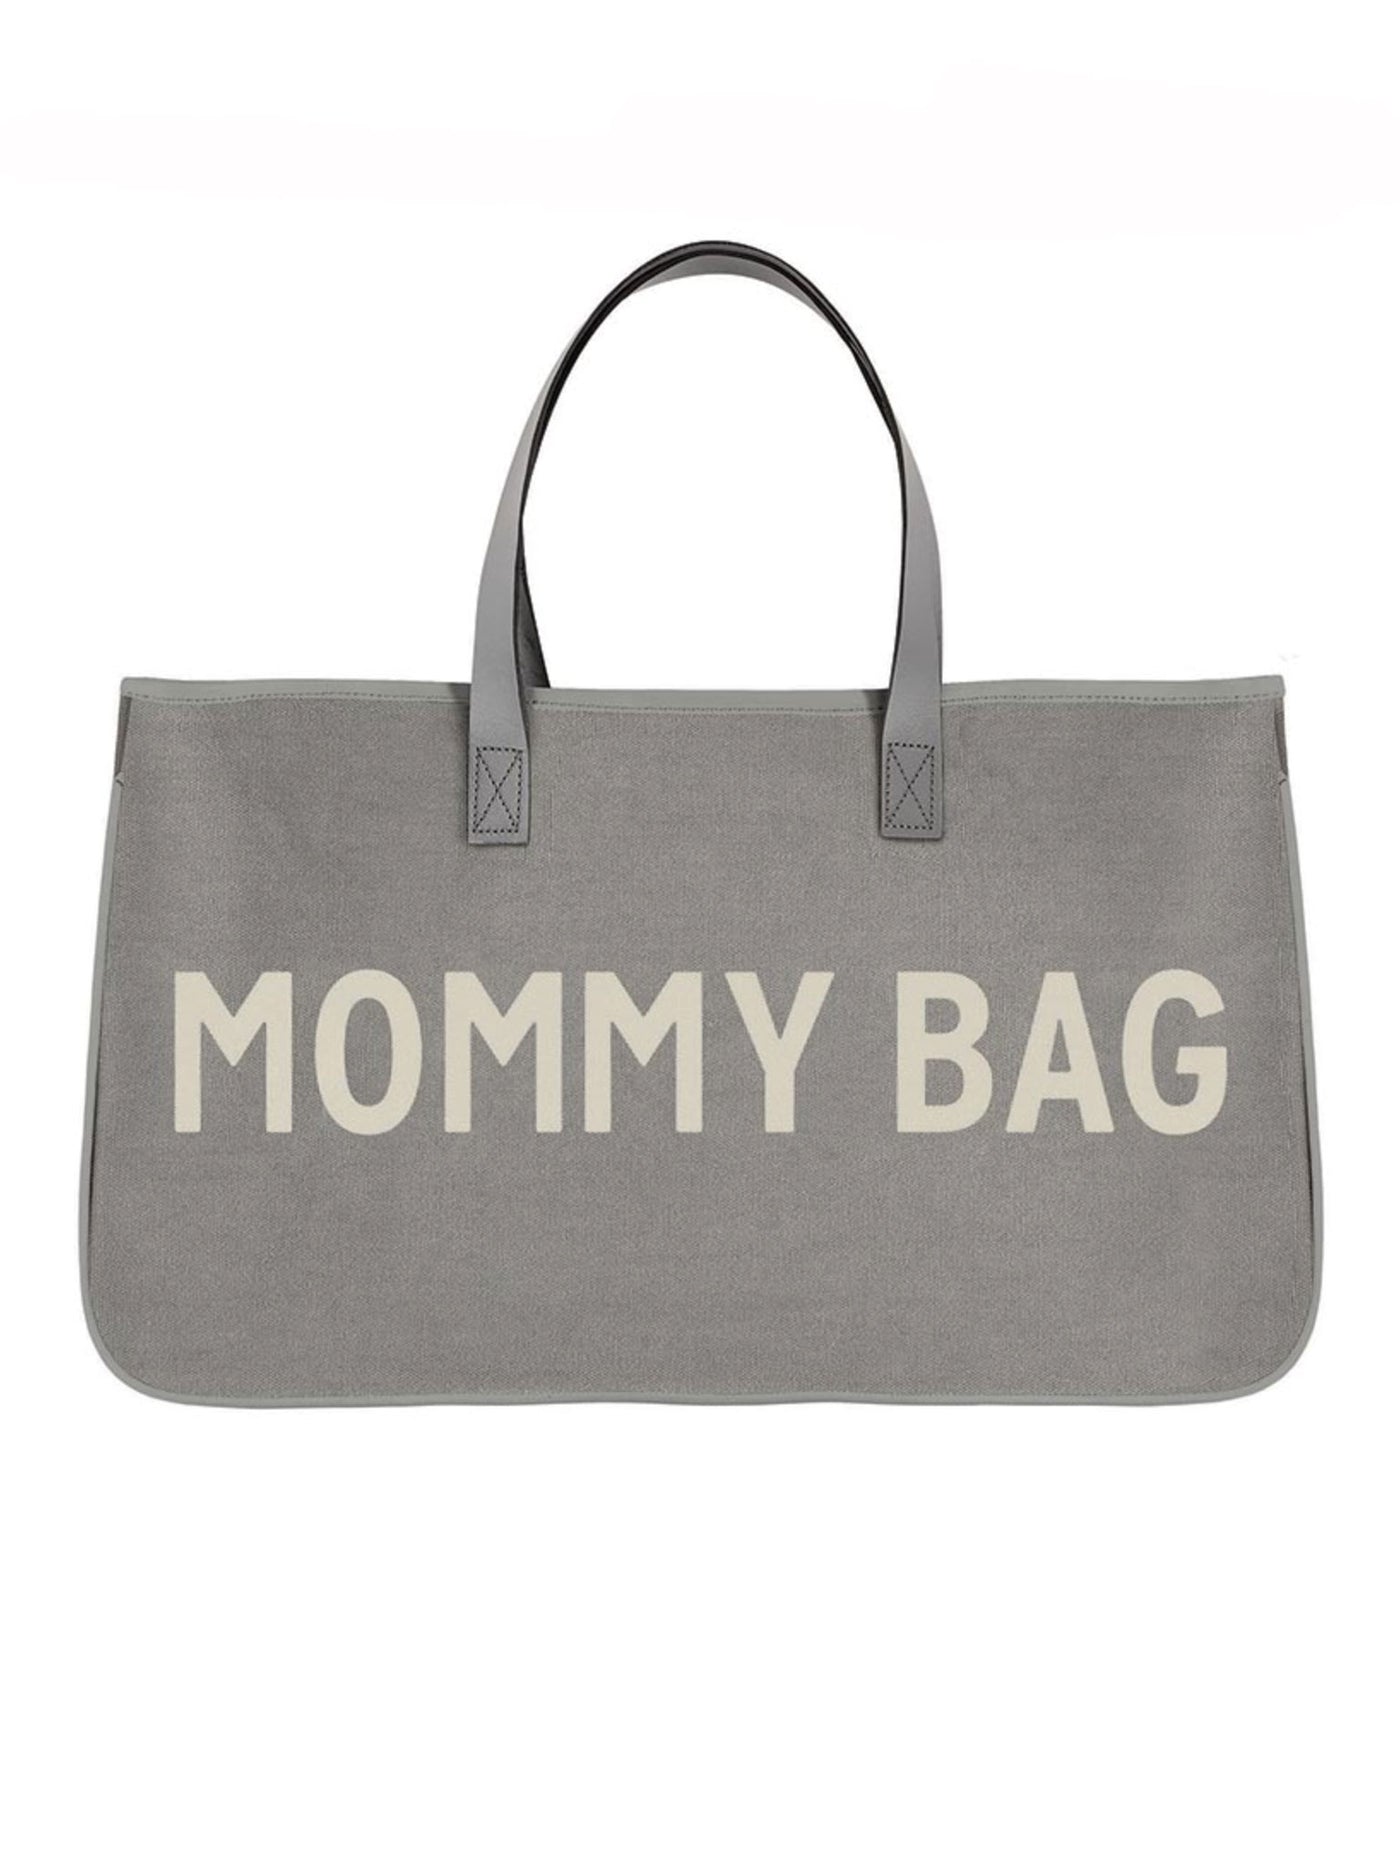 Mommy Bag Grey Canvas Tote